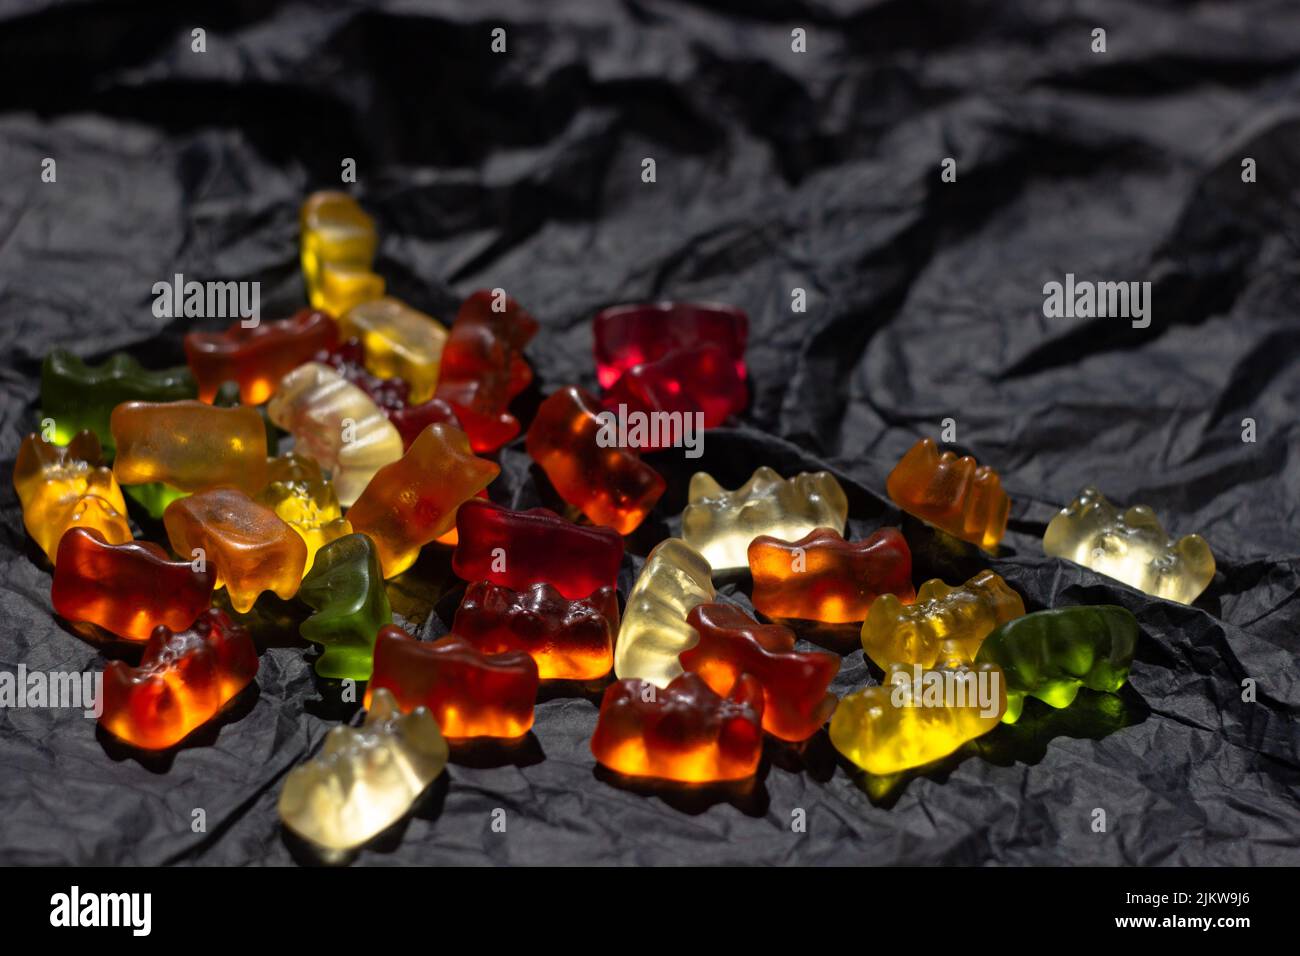 Multi-colored gummy bears lie in a chaotic manner on a black crumpled material Stock Photo